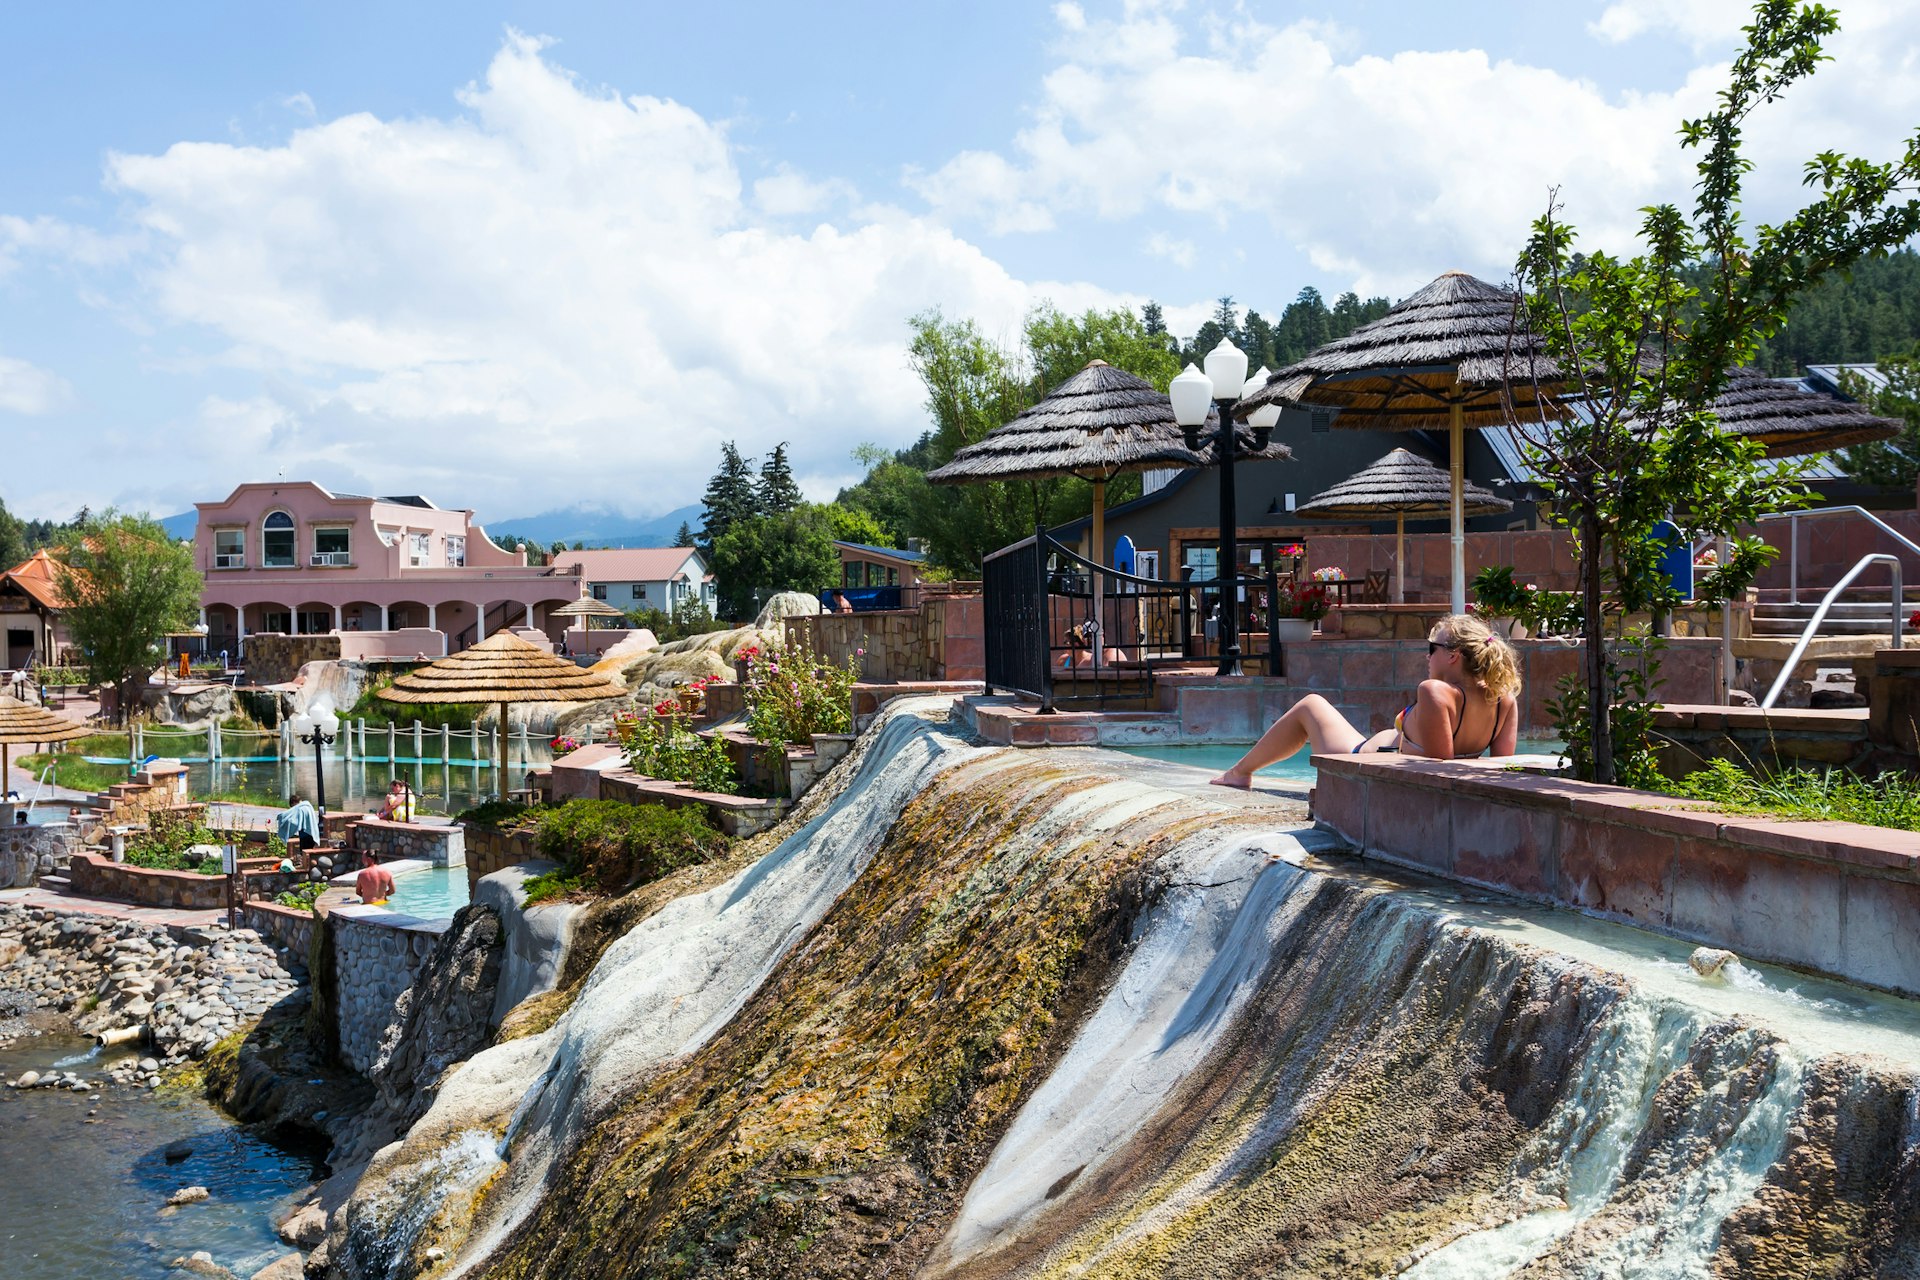 A view across The Springs Resort in Colorado showcasing the various accommodation buildings and hot springs 